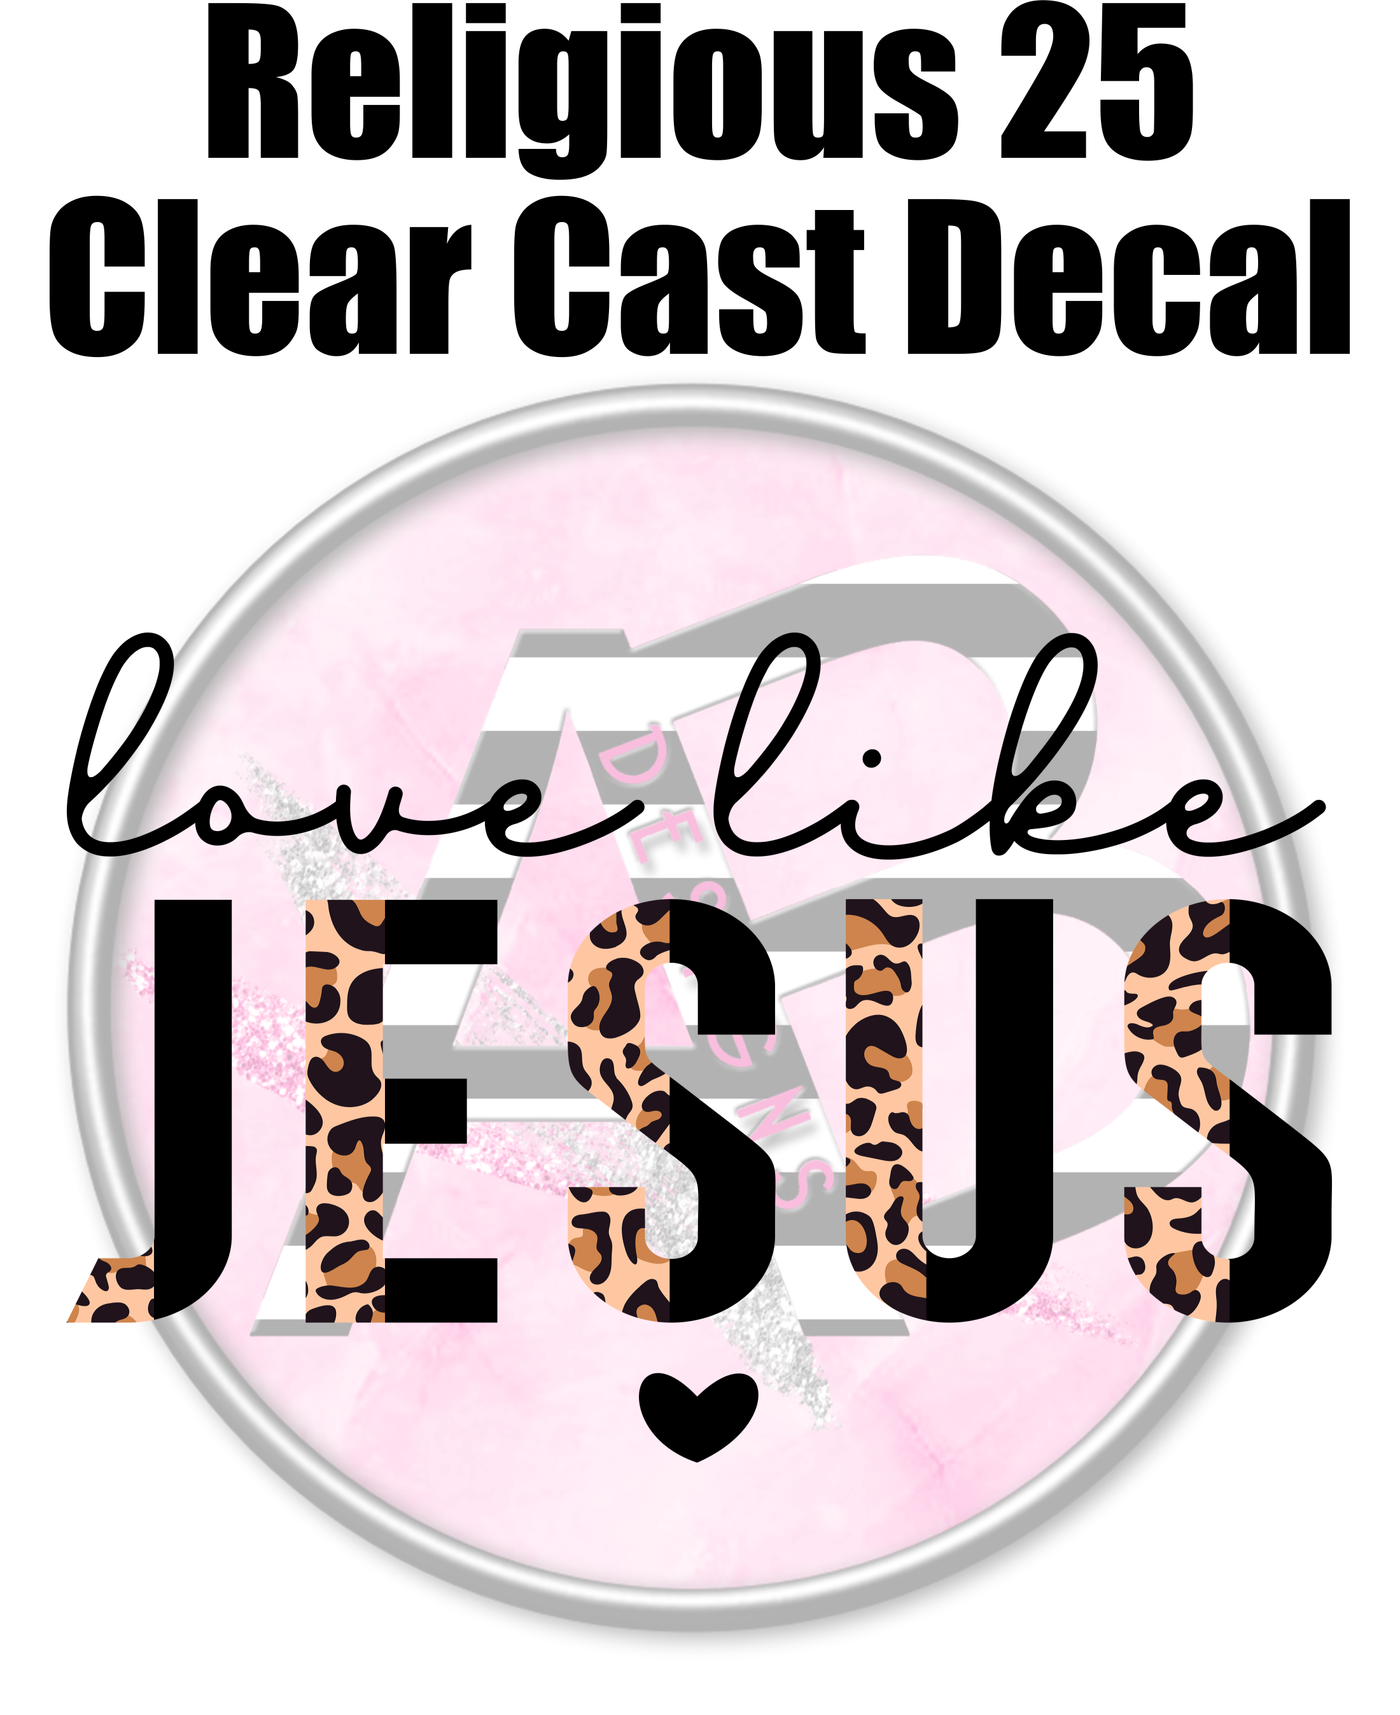 Religious 25 - Clear Cast Decal